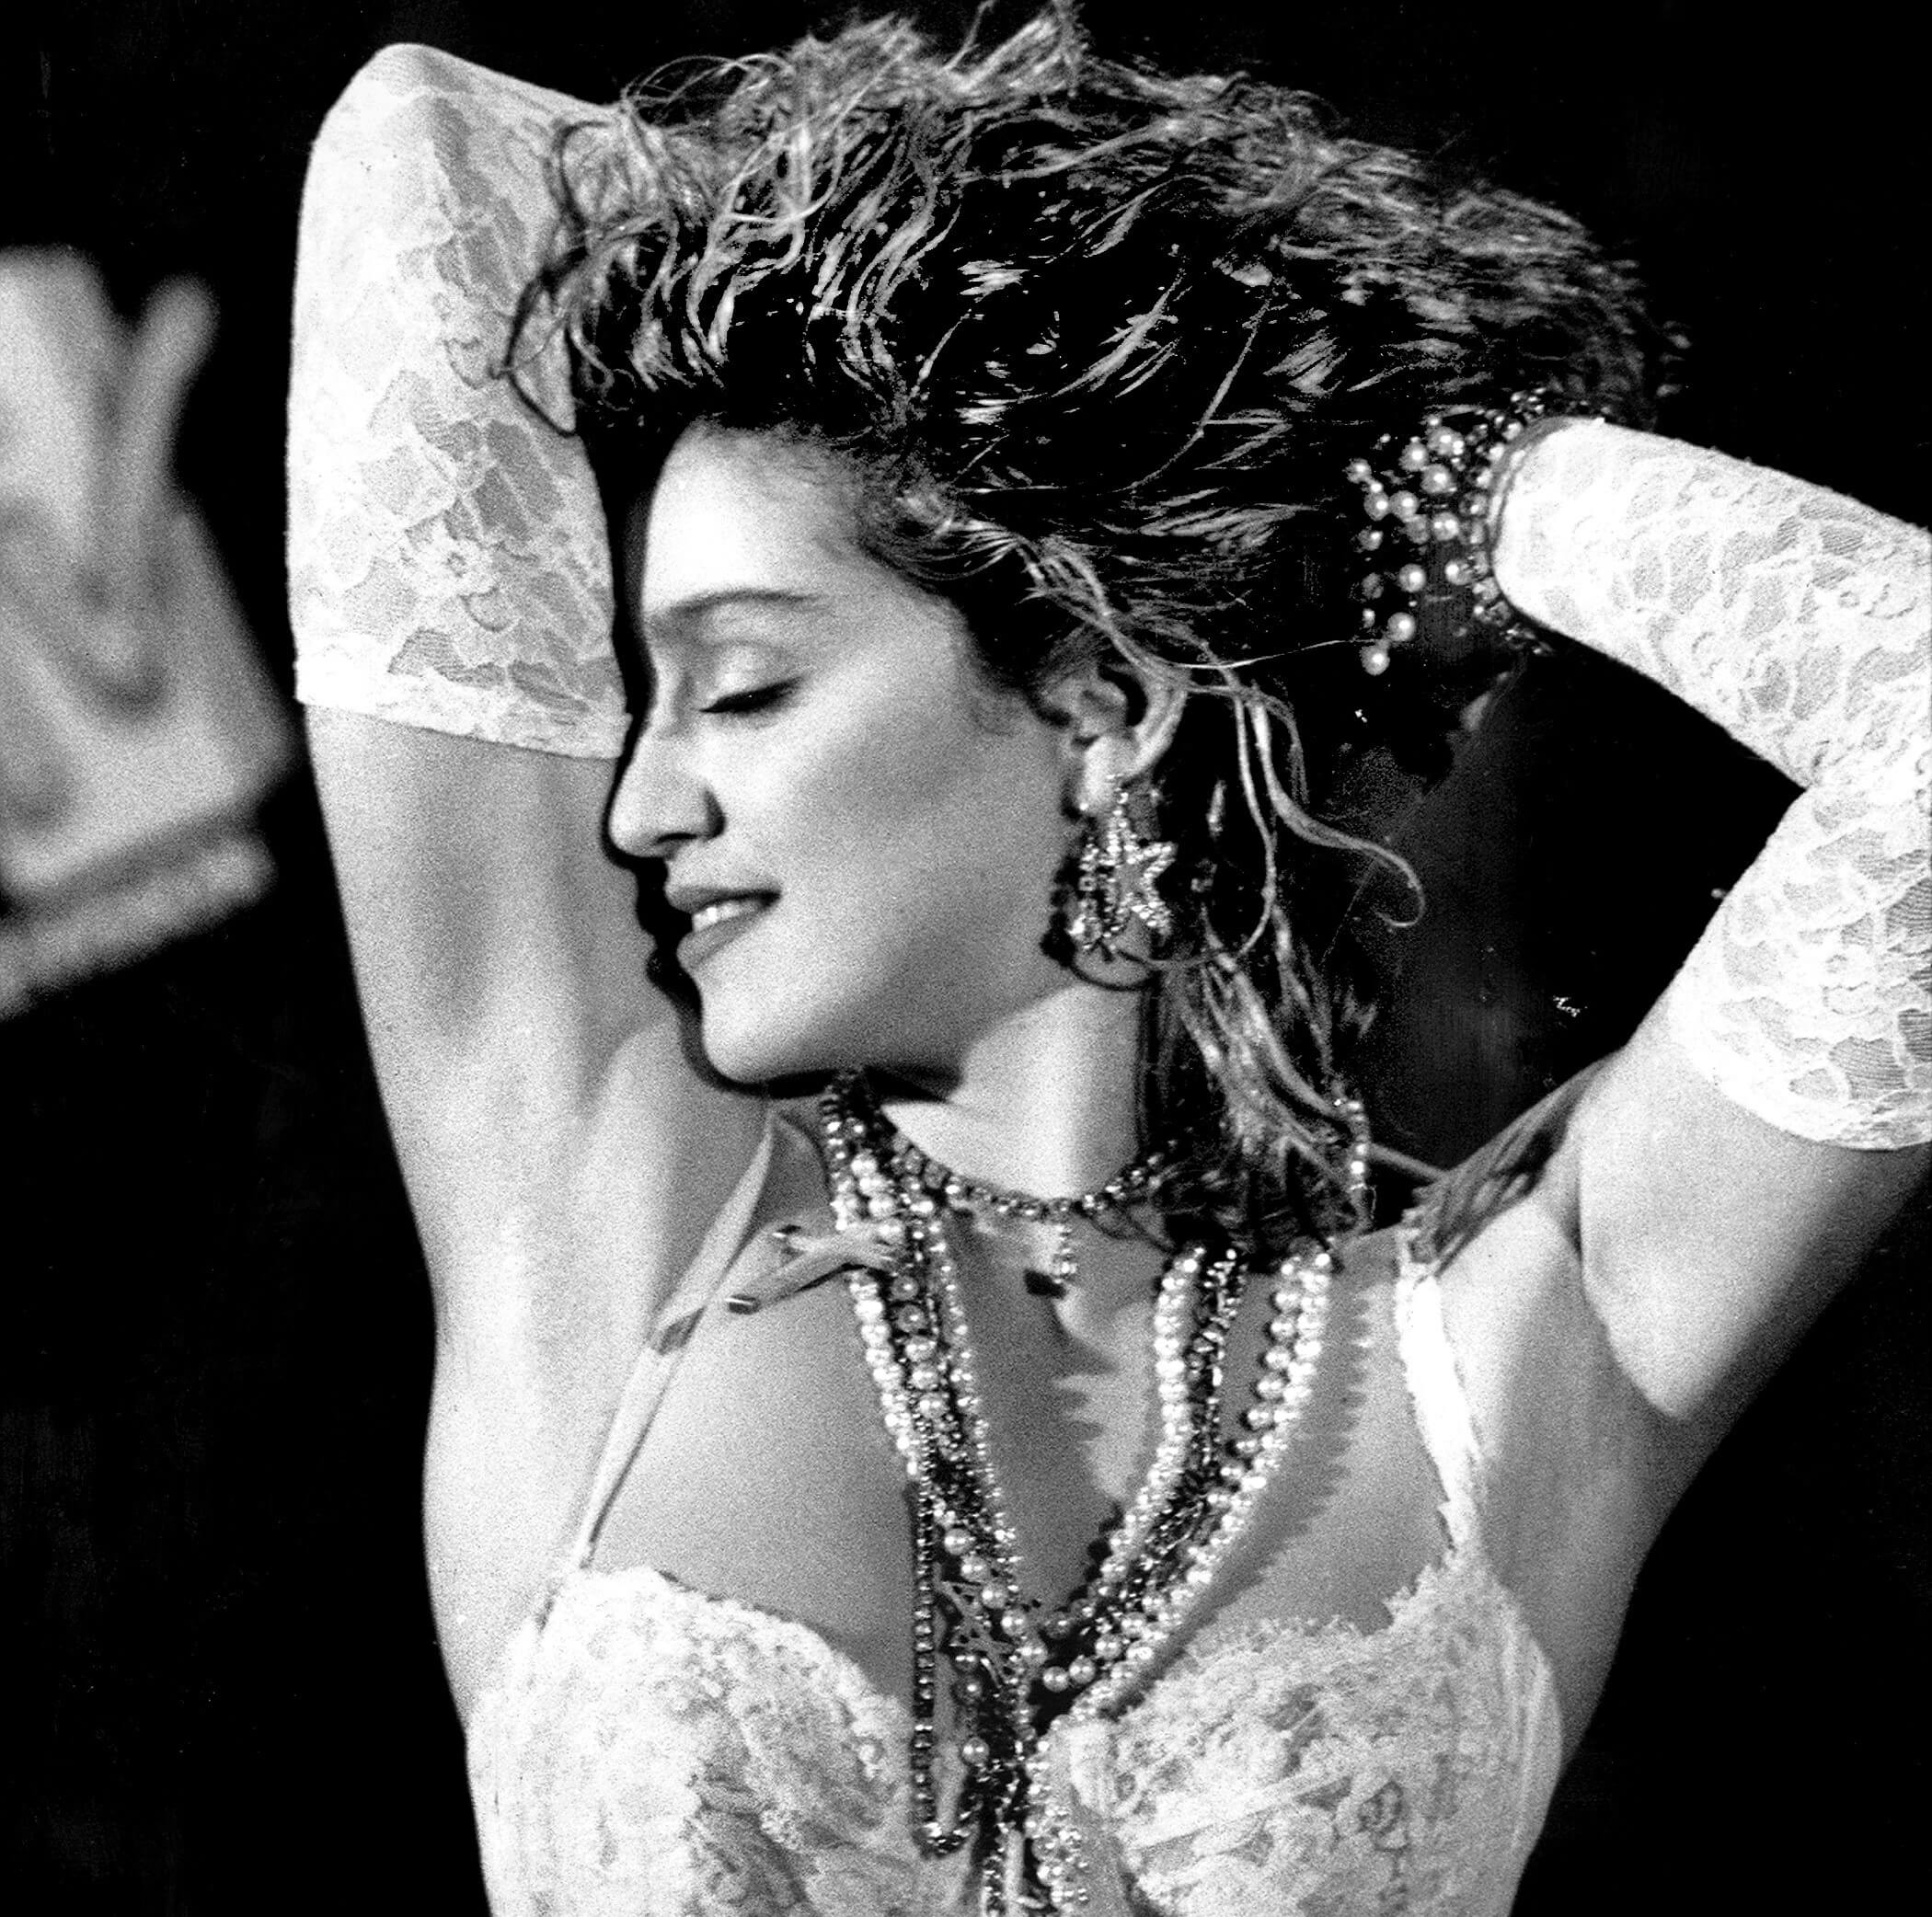 When Madonna Struck It Rich with Material Girl